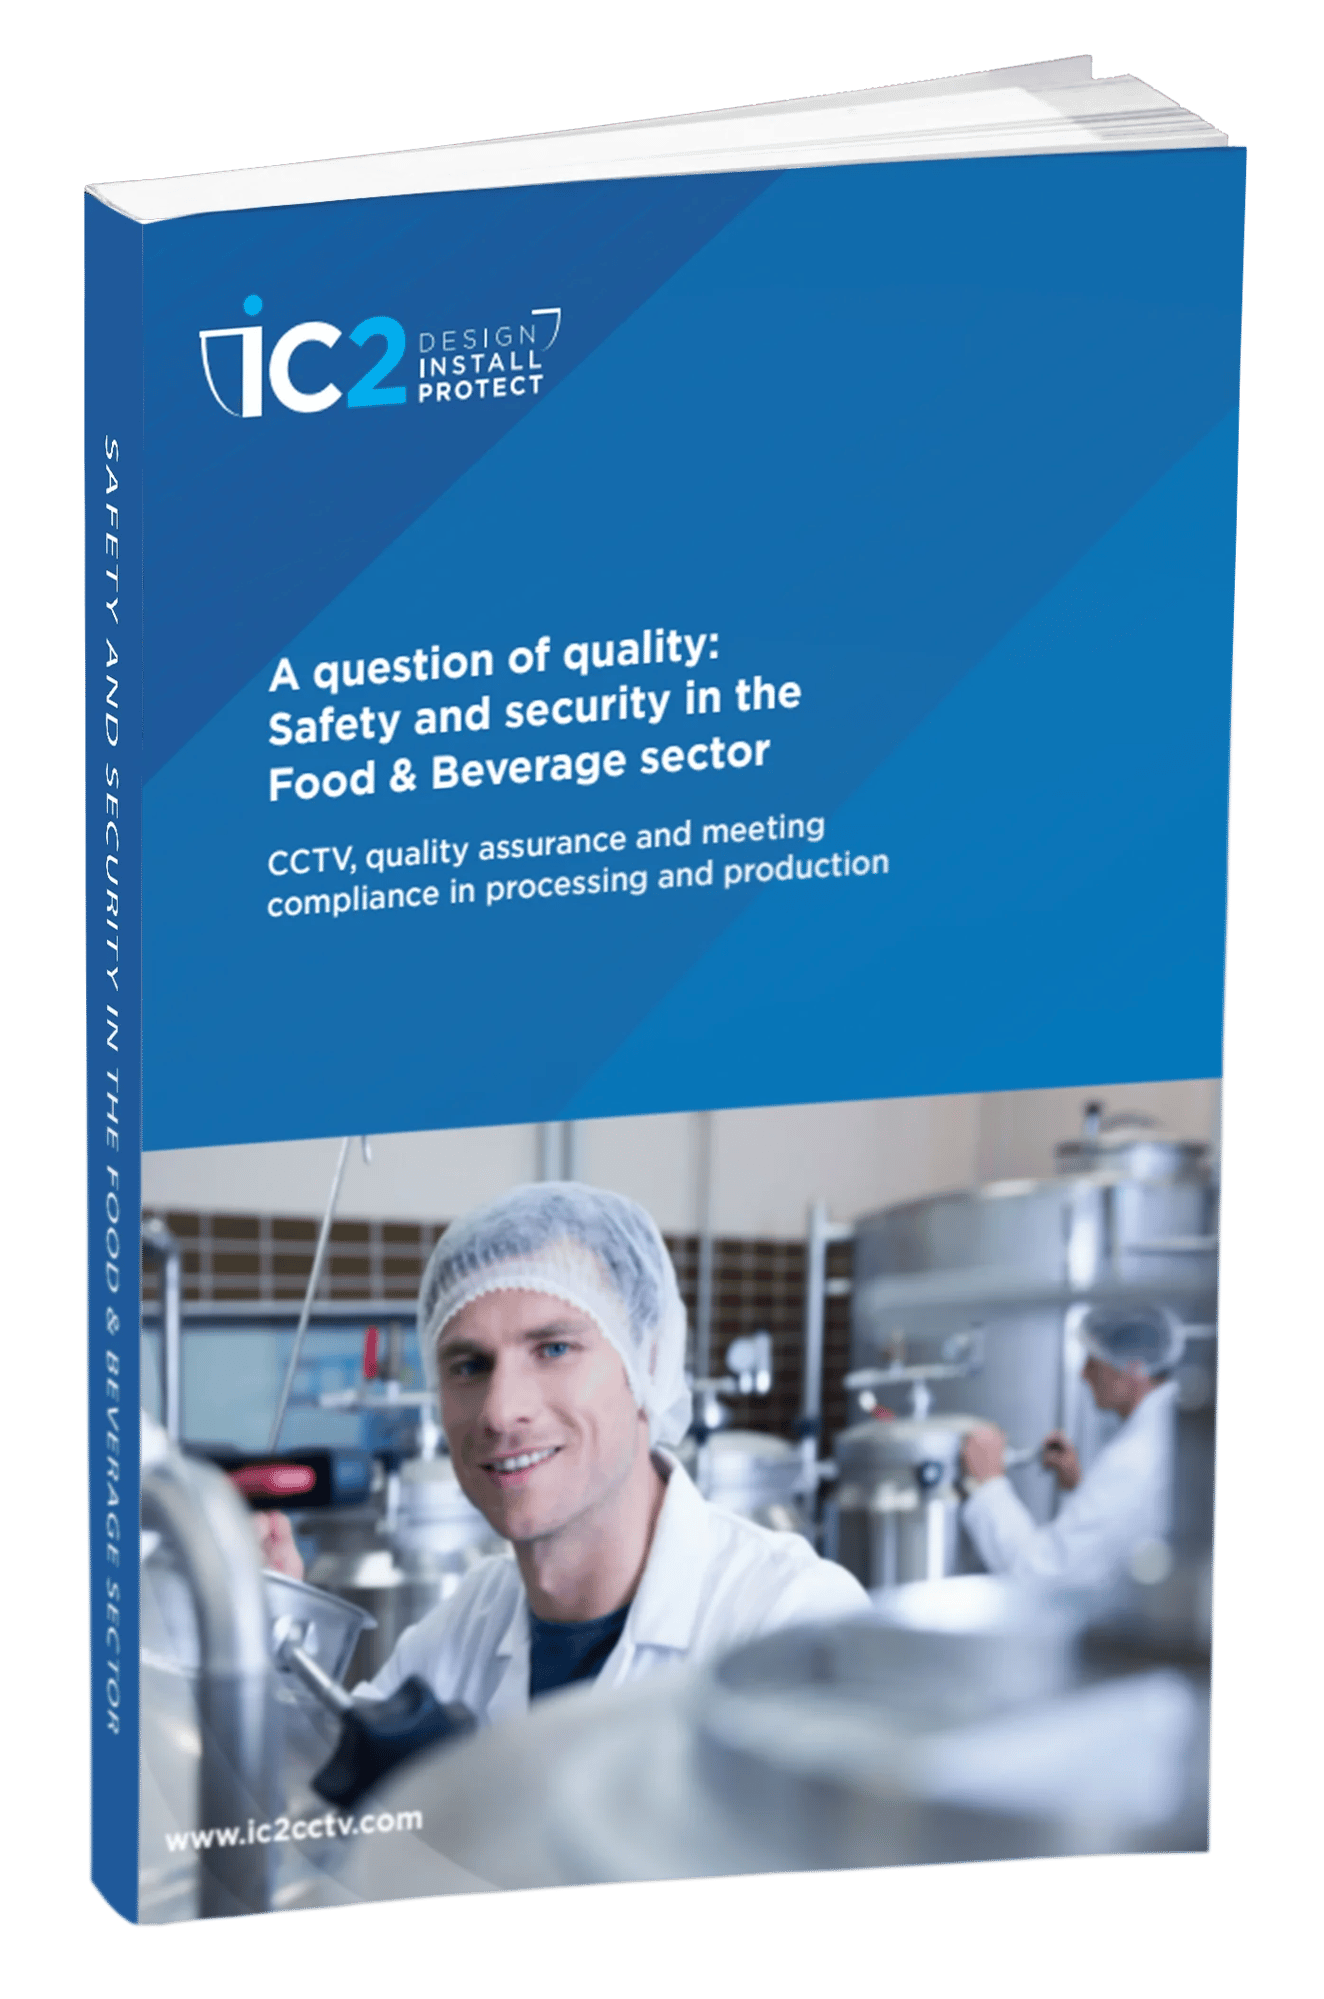 Safety and Security in the Food & Beverage Sector